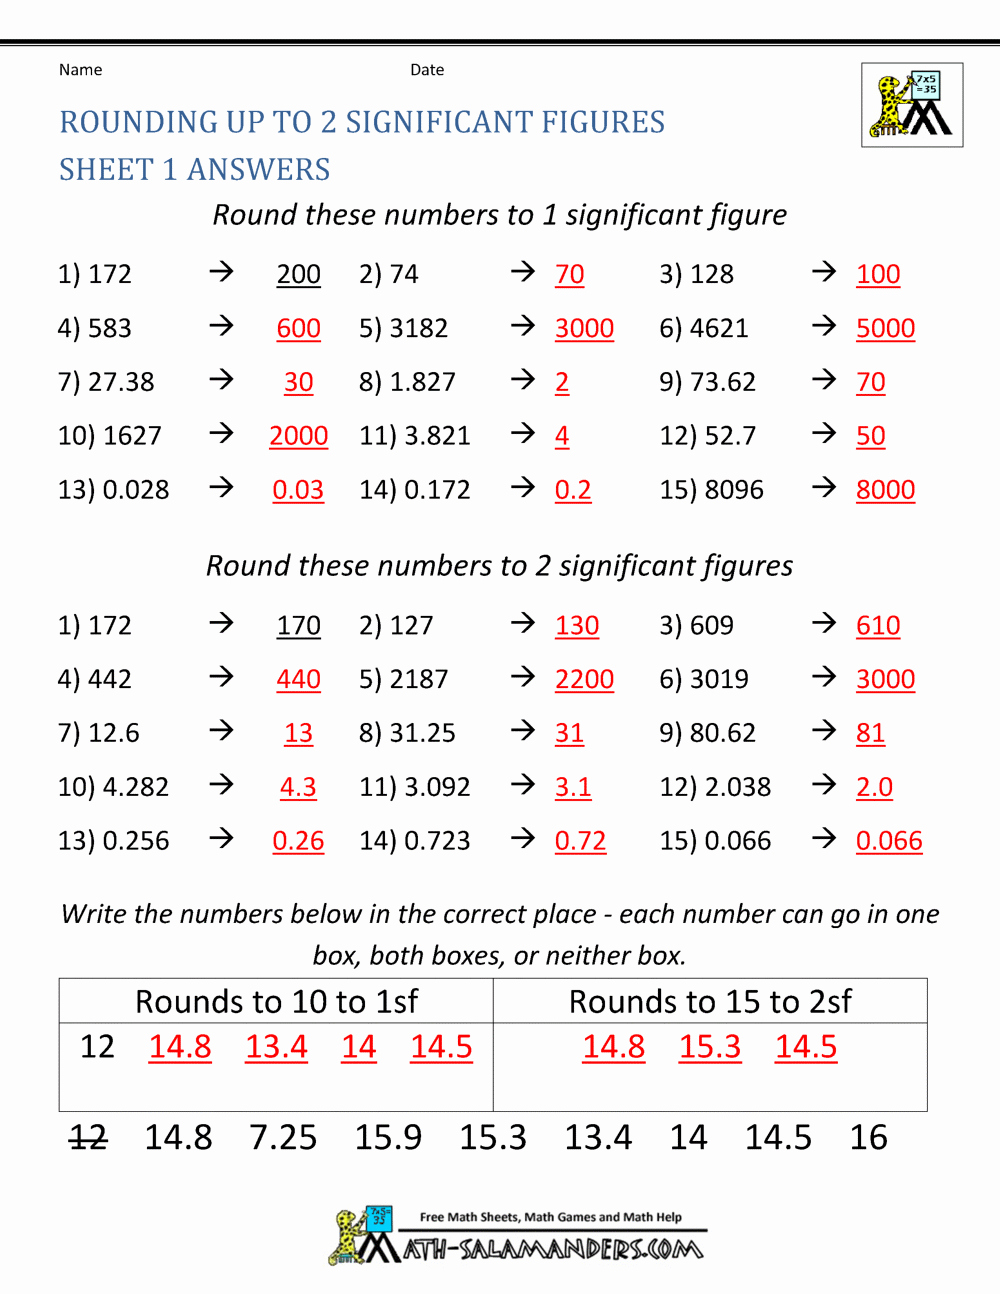 Significant Figures Practice Worksheet Beautiful Rounding Significant Figures